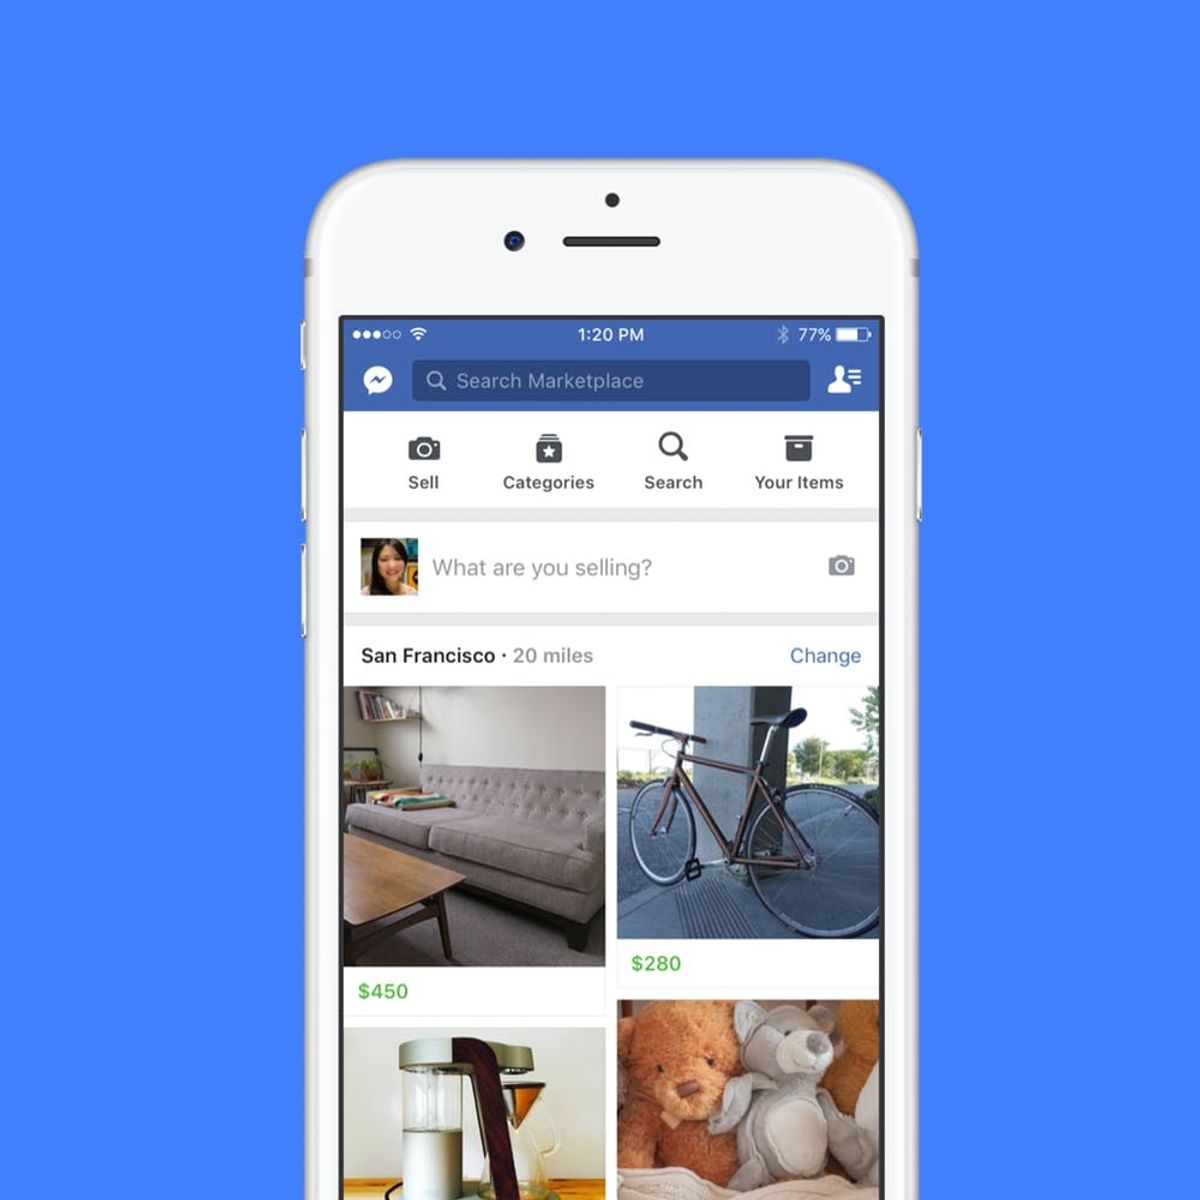 Facebook Just Launched a Less Risky Competitor of Craigslist